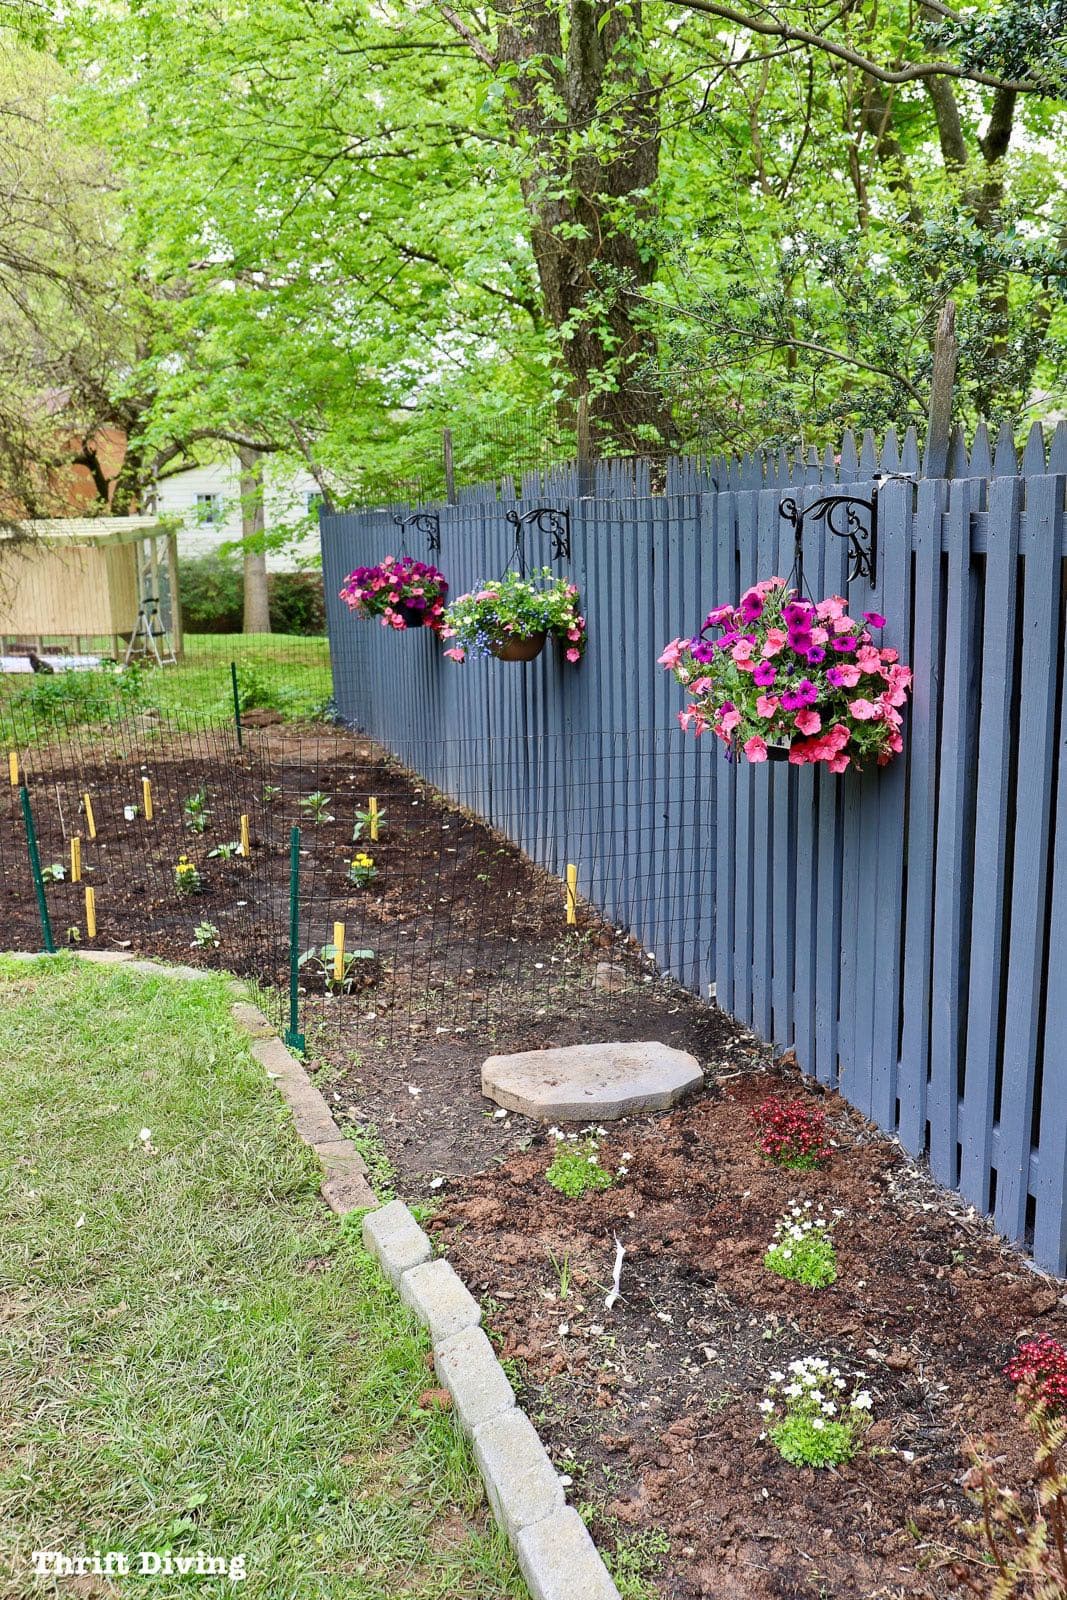 How to Use a Paint Sprayer to Paint a Wood Fence - AFTER - See how an ugly fence got this pretty blue little makeover using a paint sprayer! - Thrift Diving